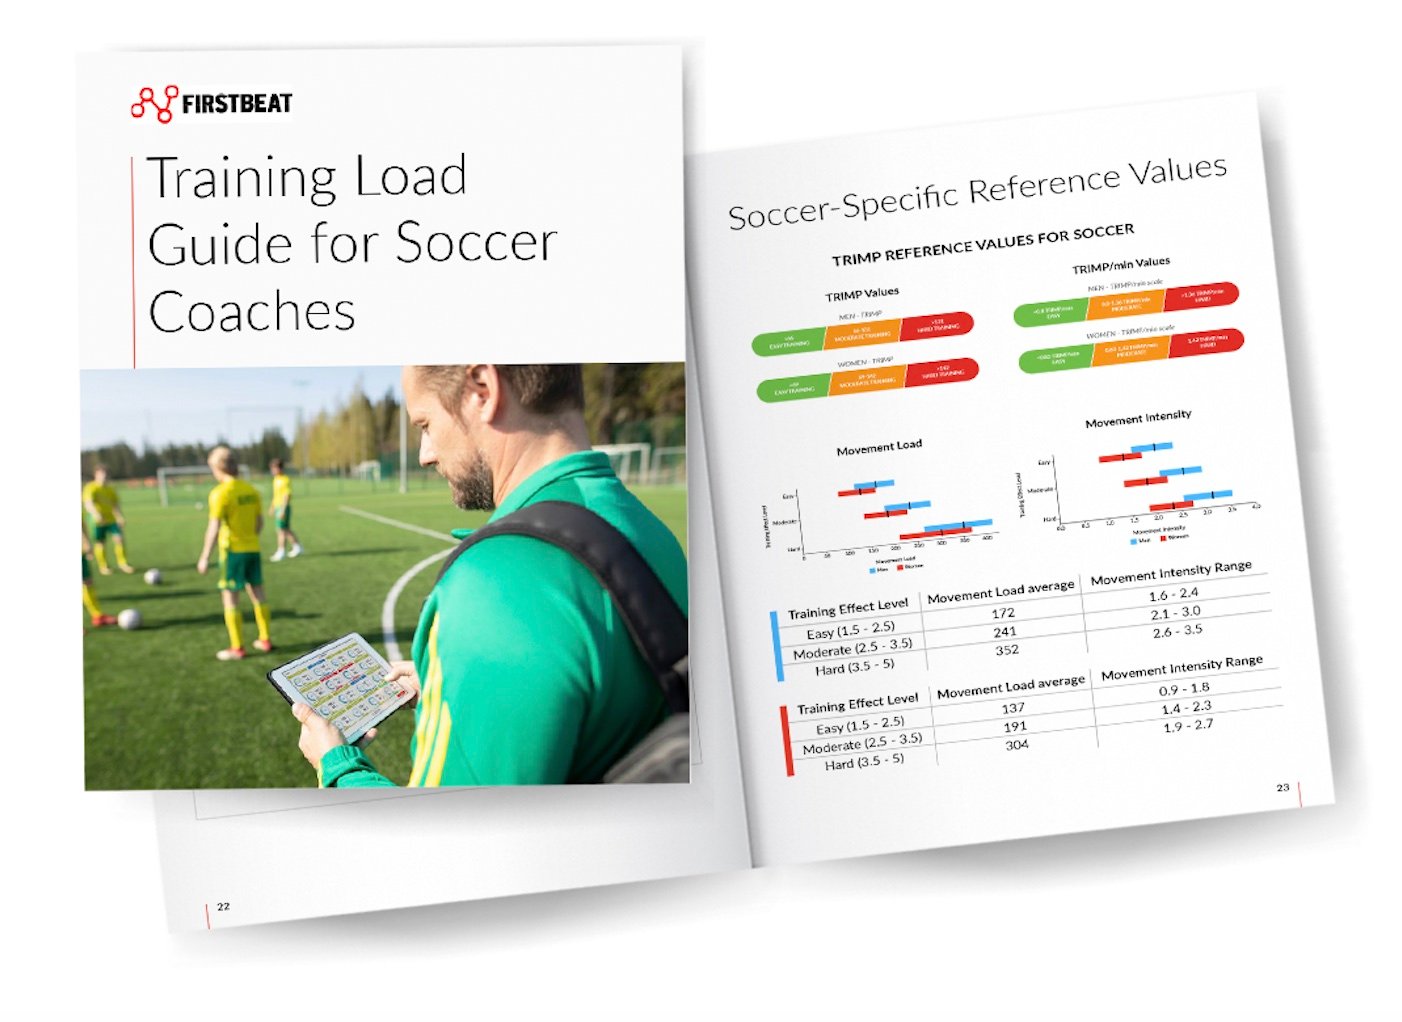 Firstbeat Life Training Load Guide for Soccer Coaches header image